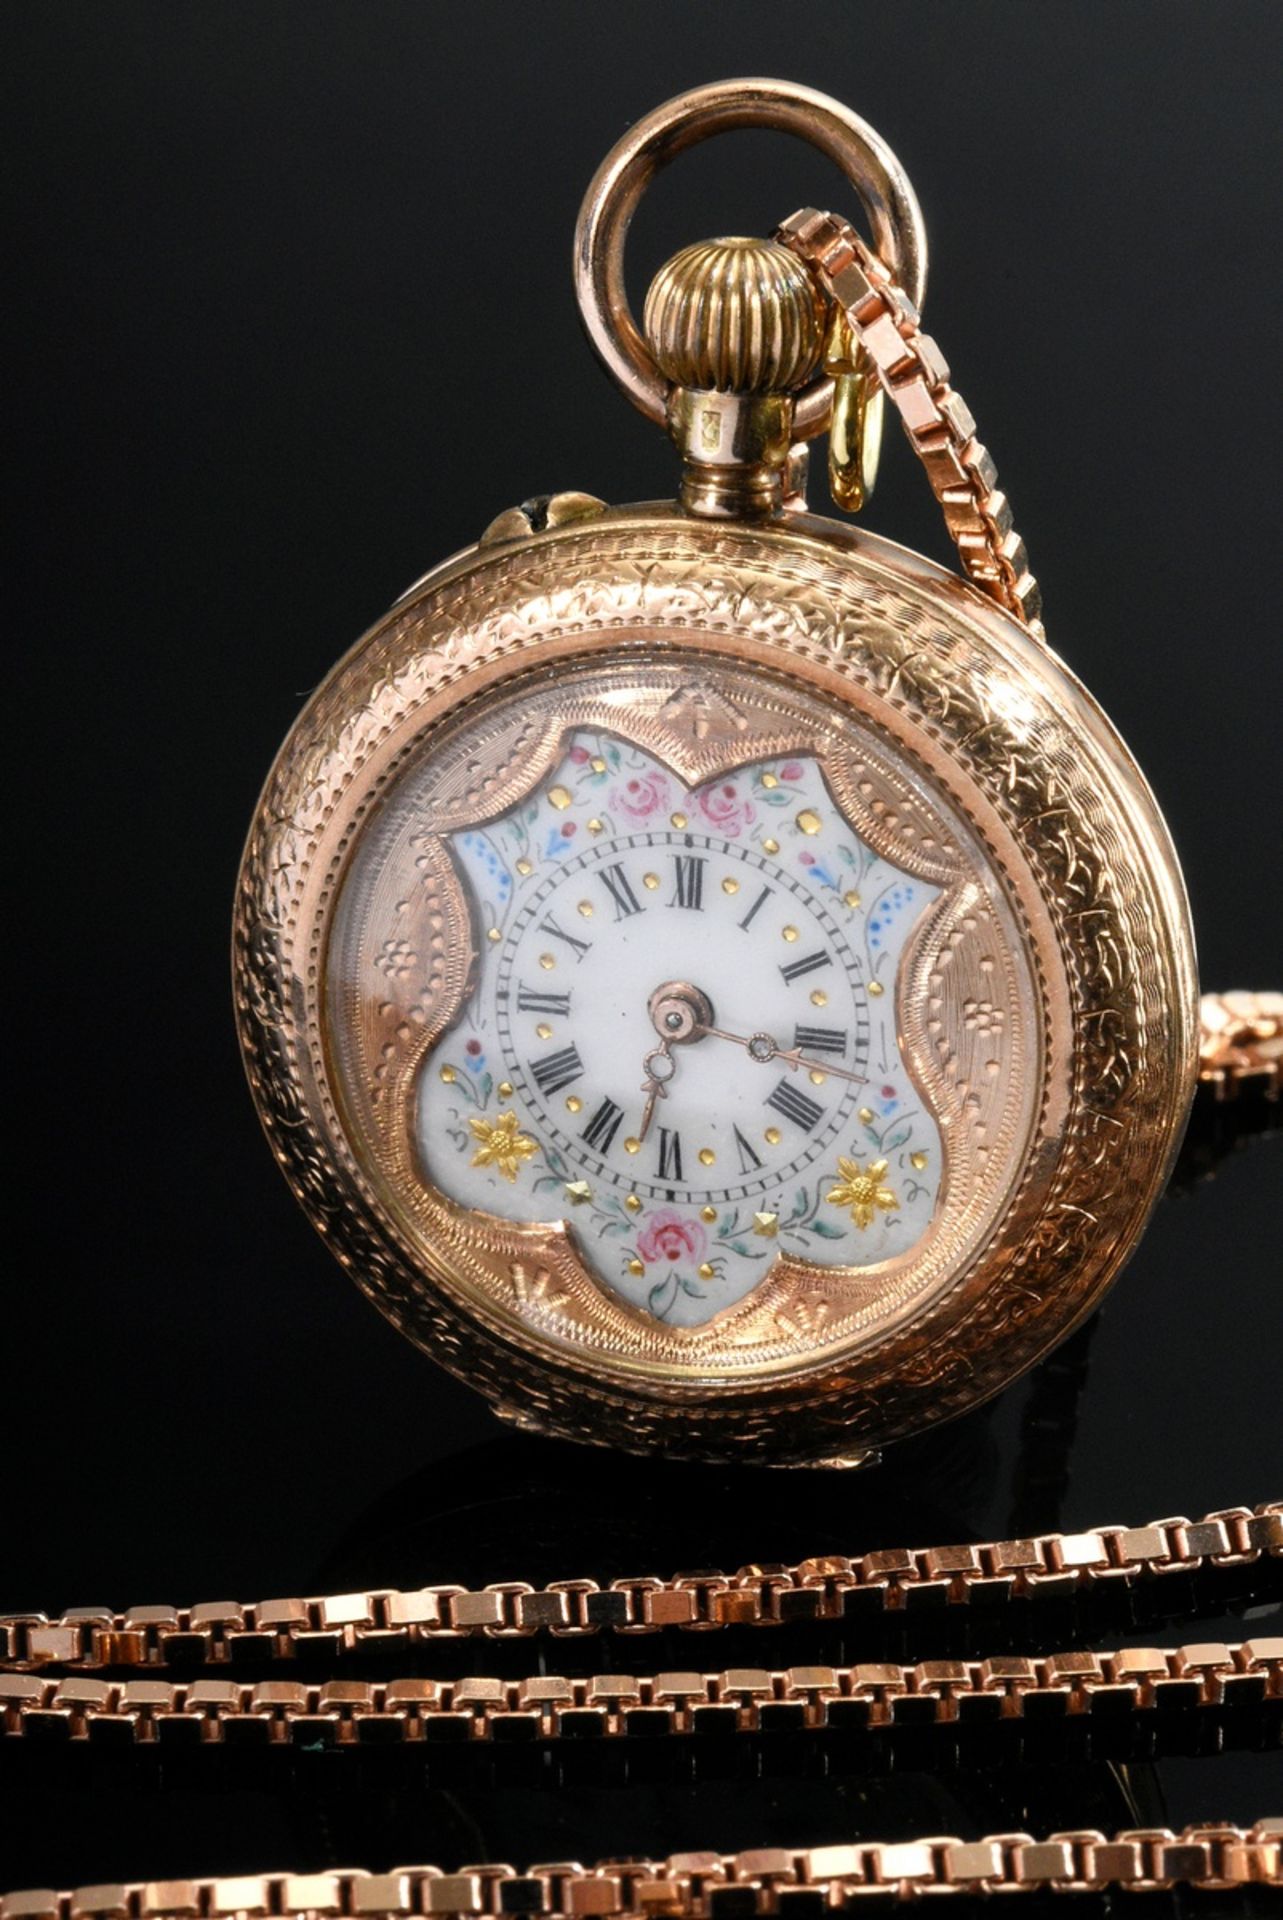 Red gold 585 ladies' savonette, cylinder movement, enamel dial with flowers and Roman numerals (24.